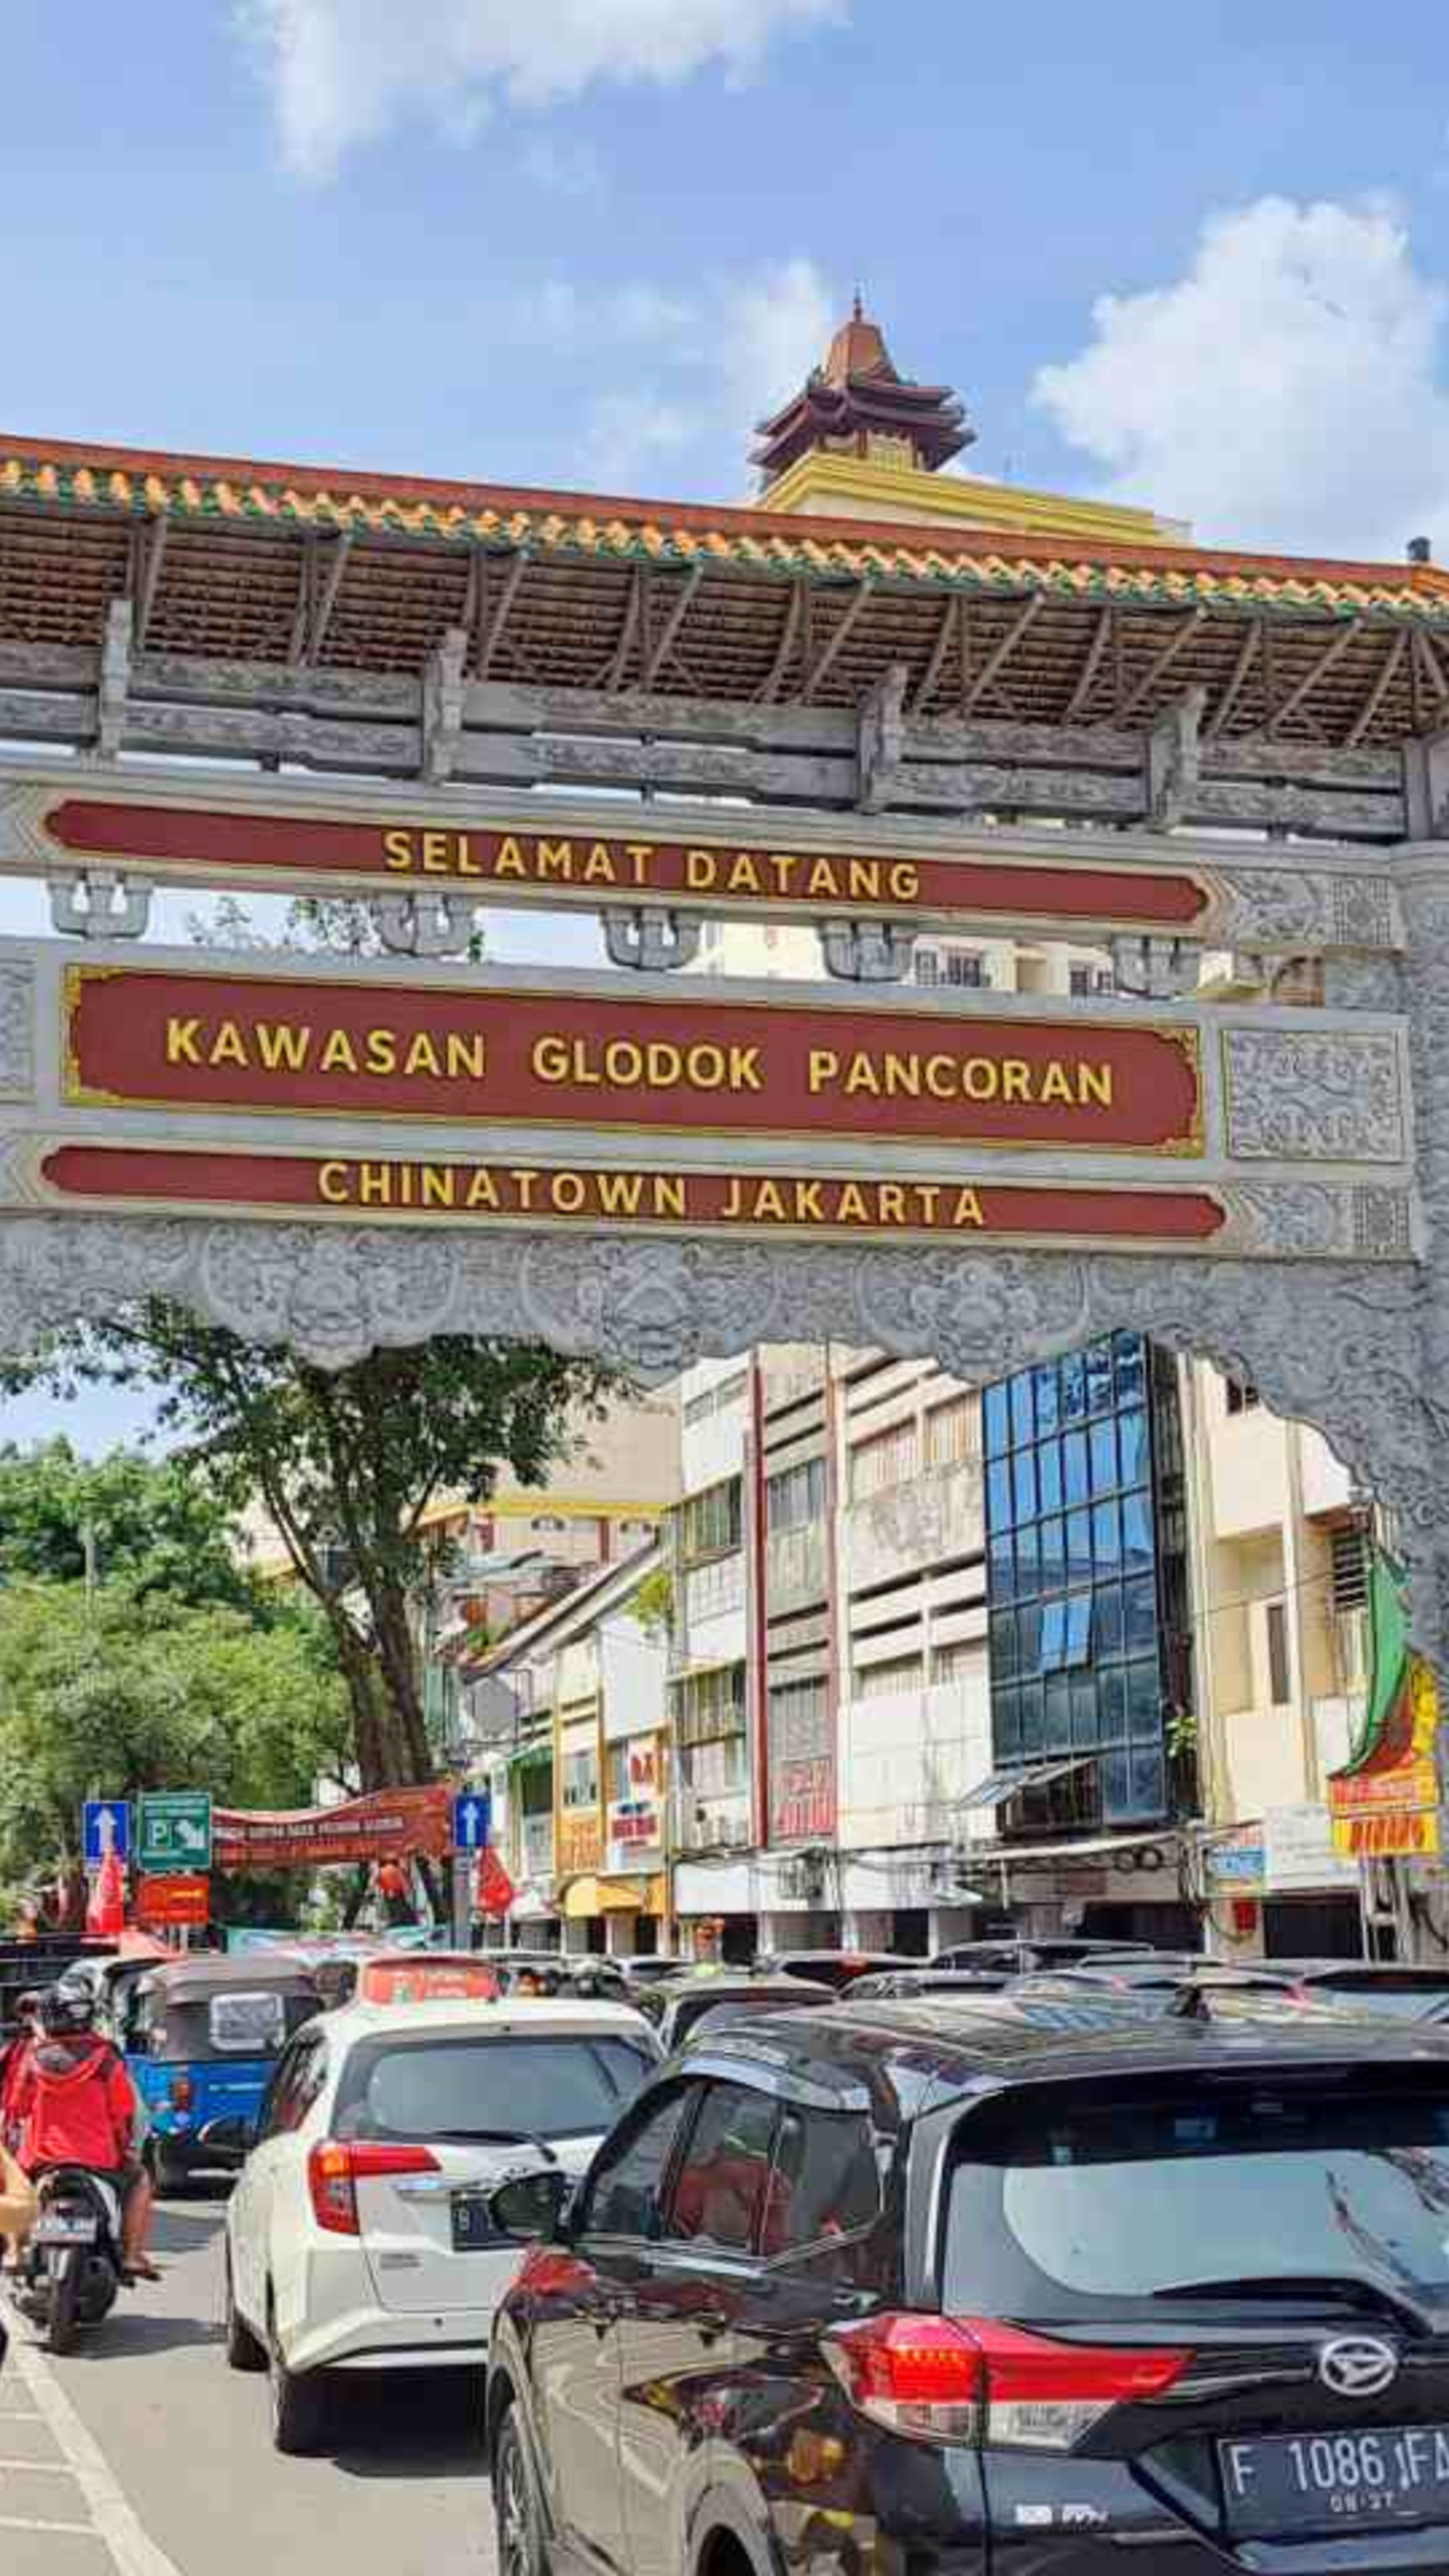 An ornate gateway welcomes visitors to Glodok, the vibrant Chinatown area of Jakarta, under a sunny sky.